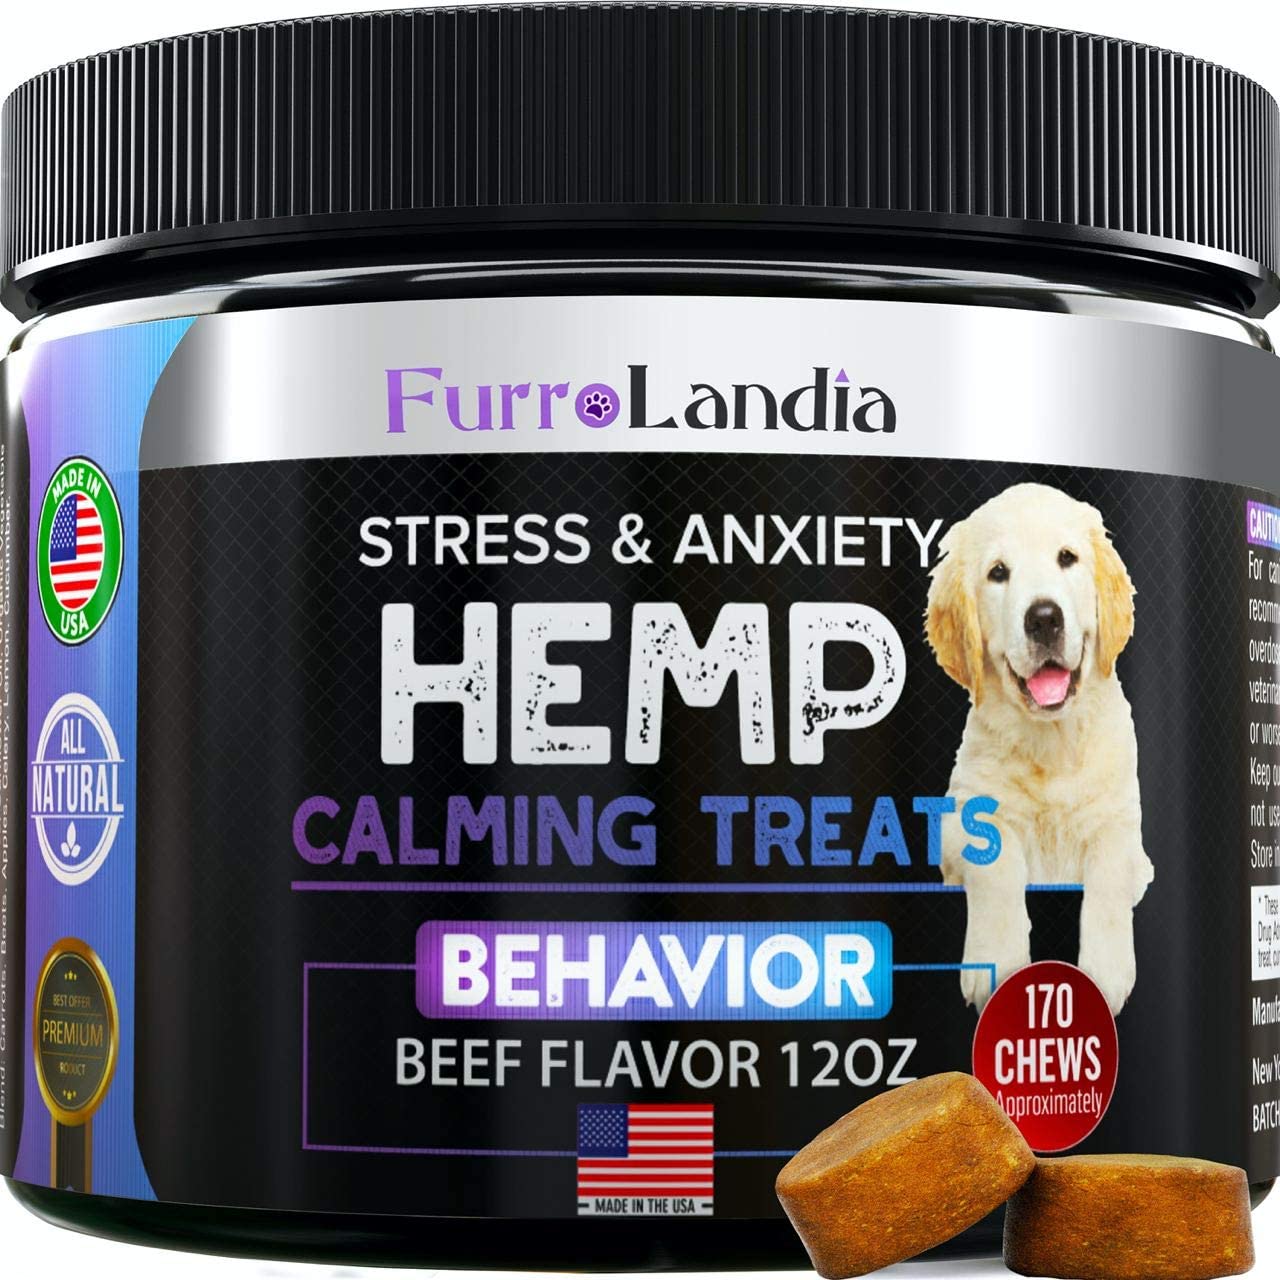 FurroLandia Hemp Calming Treats for Dogs - 170 Soft Chews - Made in USA - Hemp Oil for Dogs - Dog Anxiety Relief - Natural Calming Aid - Stress - Fireworks | Aggressive Behavior (Beef Flavor)